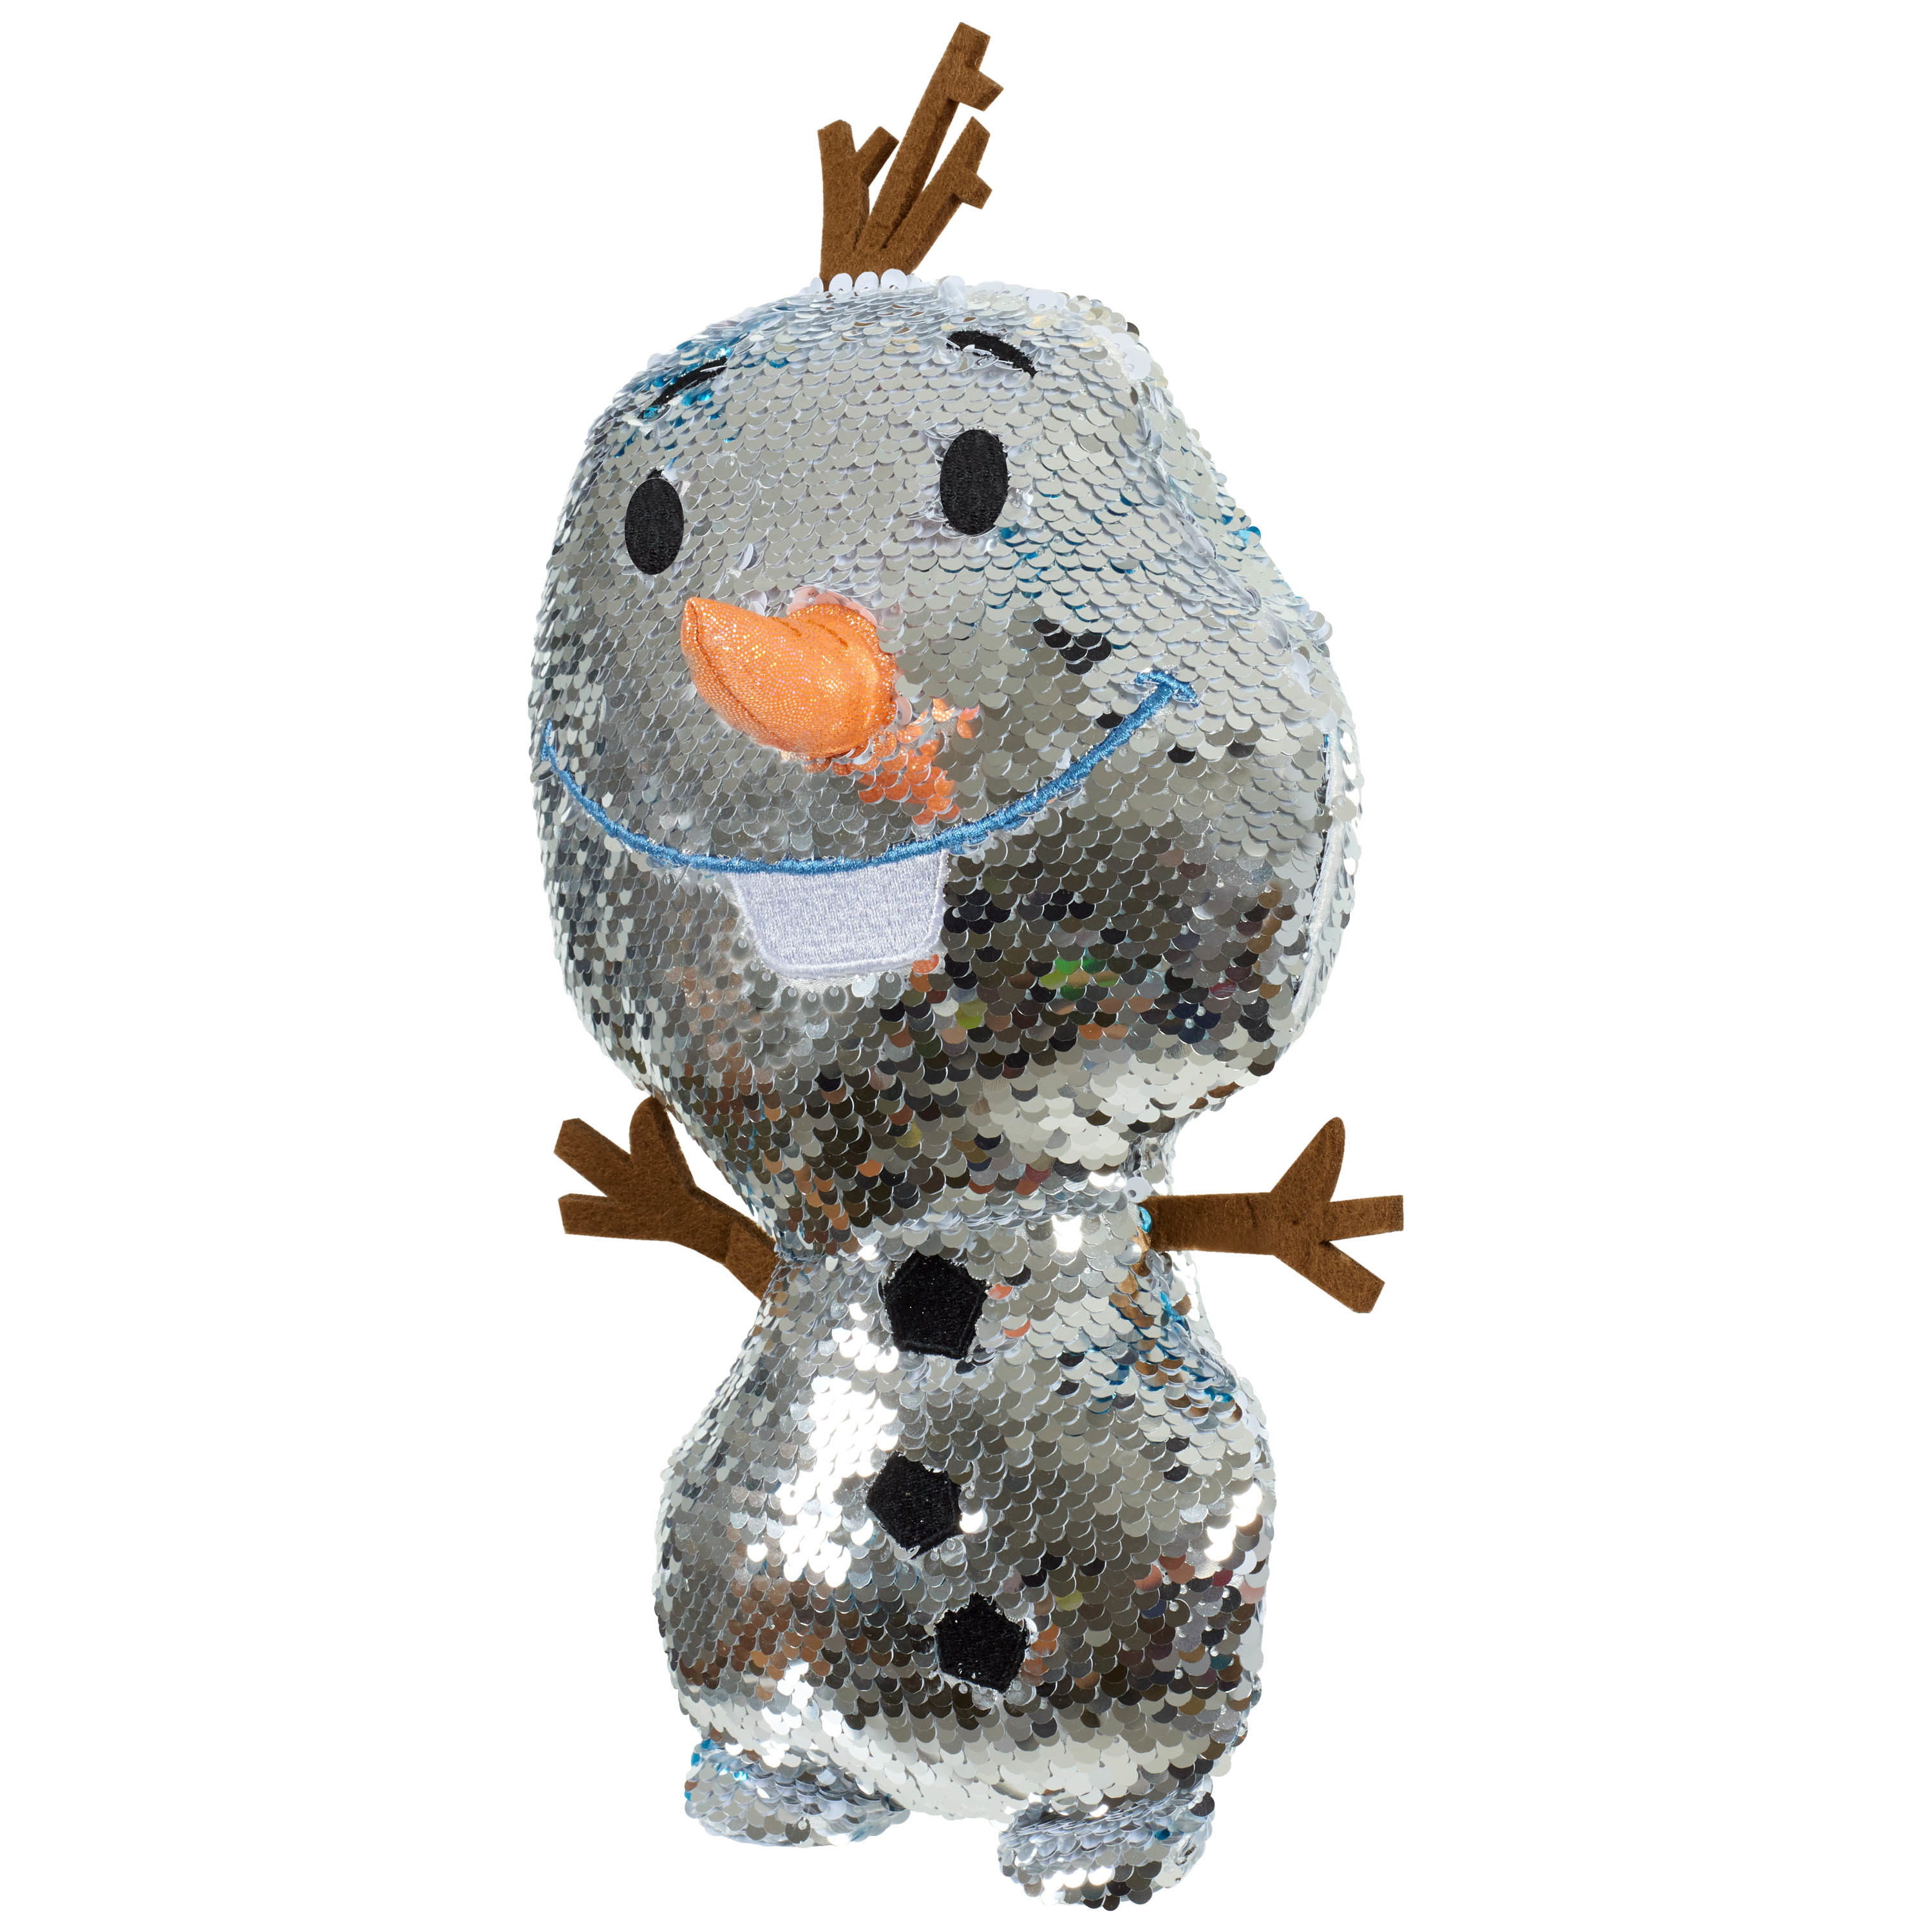 Disney Frozen 2 Reversible Sequins Large Plush Olaf, Officially Licensed Kids Toys for Ages 3 Up, Gifts and Presents - image 5 of 5